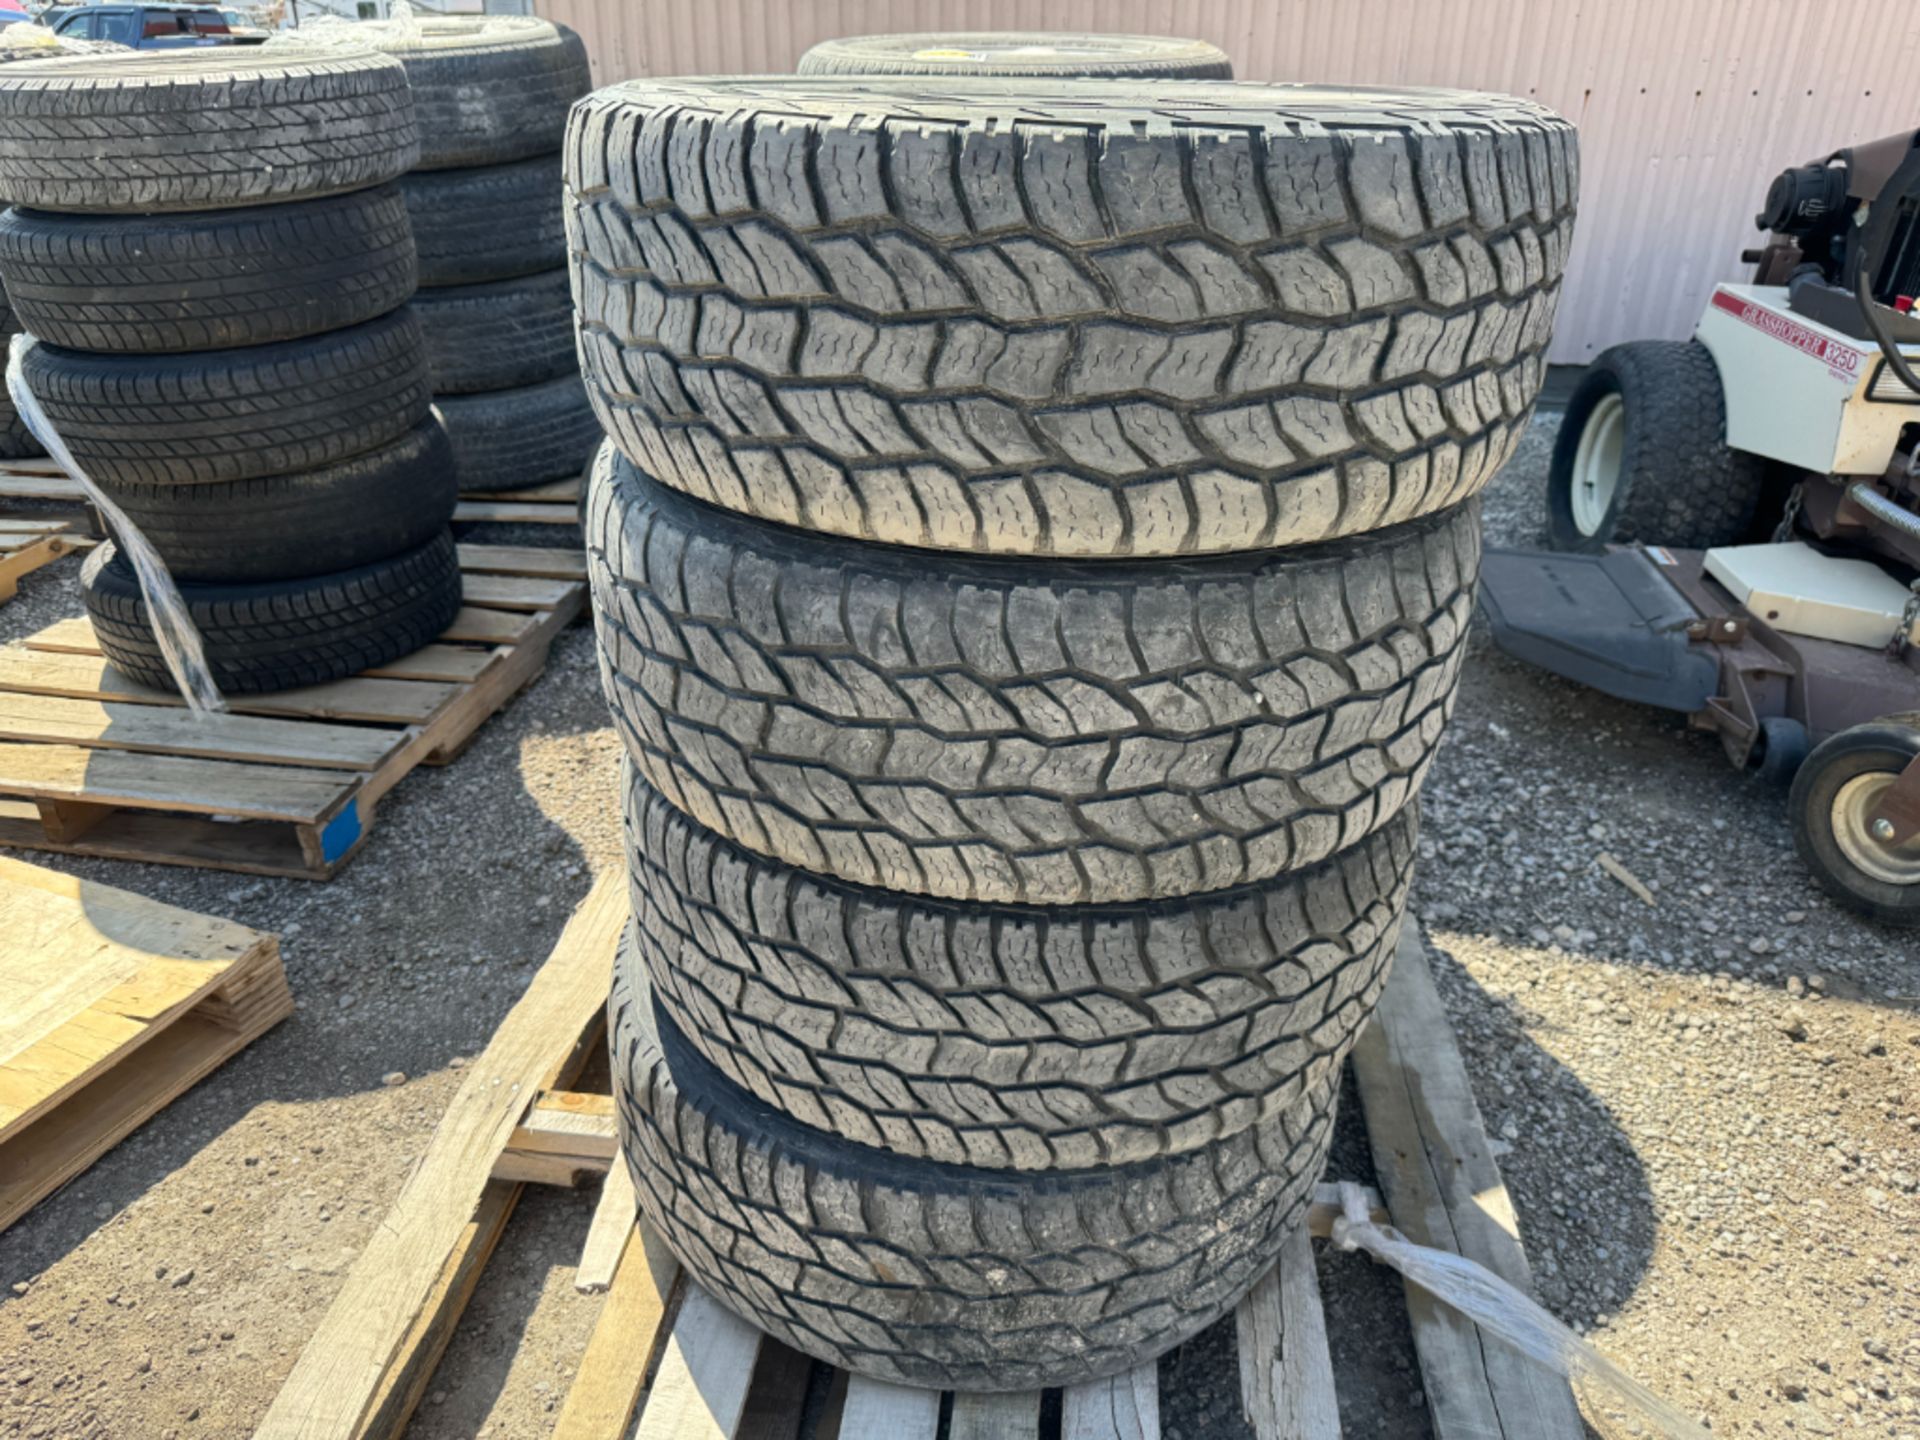 4 Discover Cooper 275/55R20 Tires - Image 2 of 5